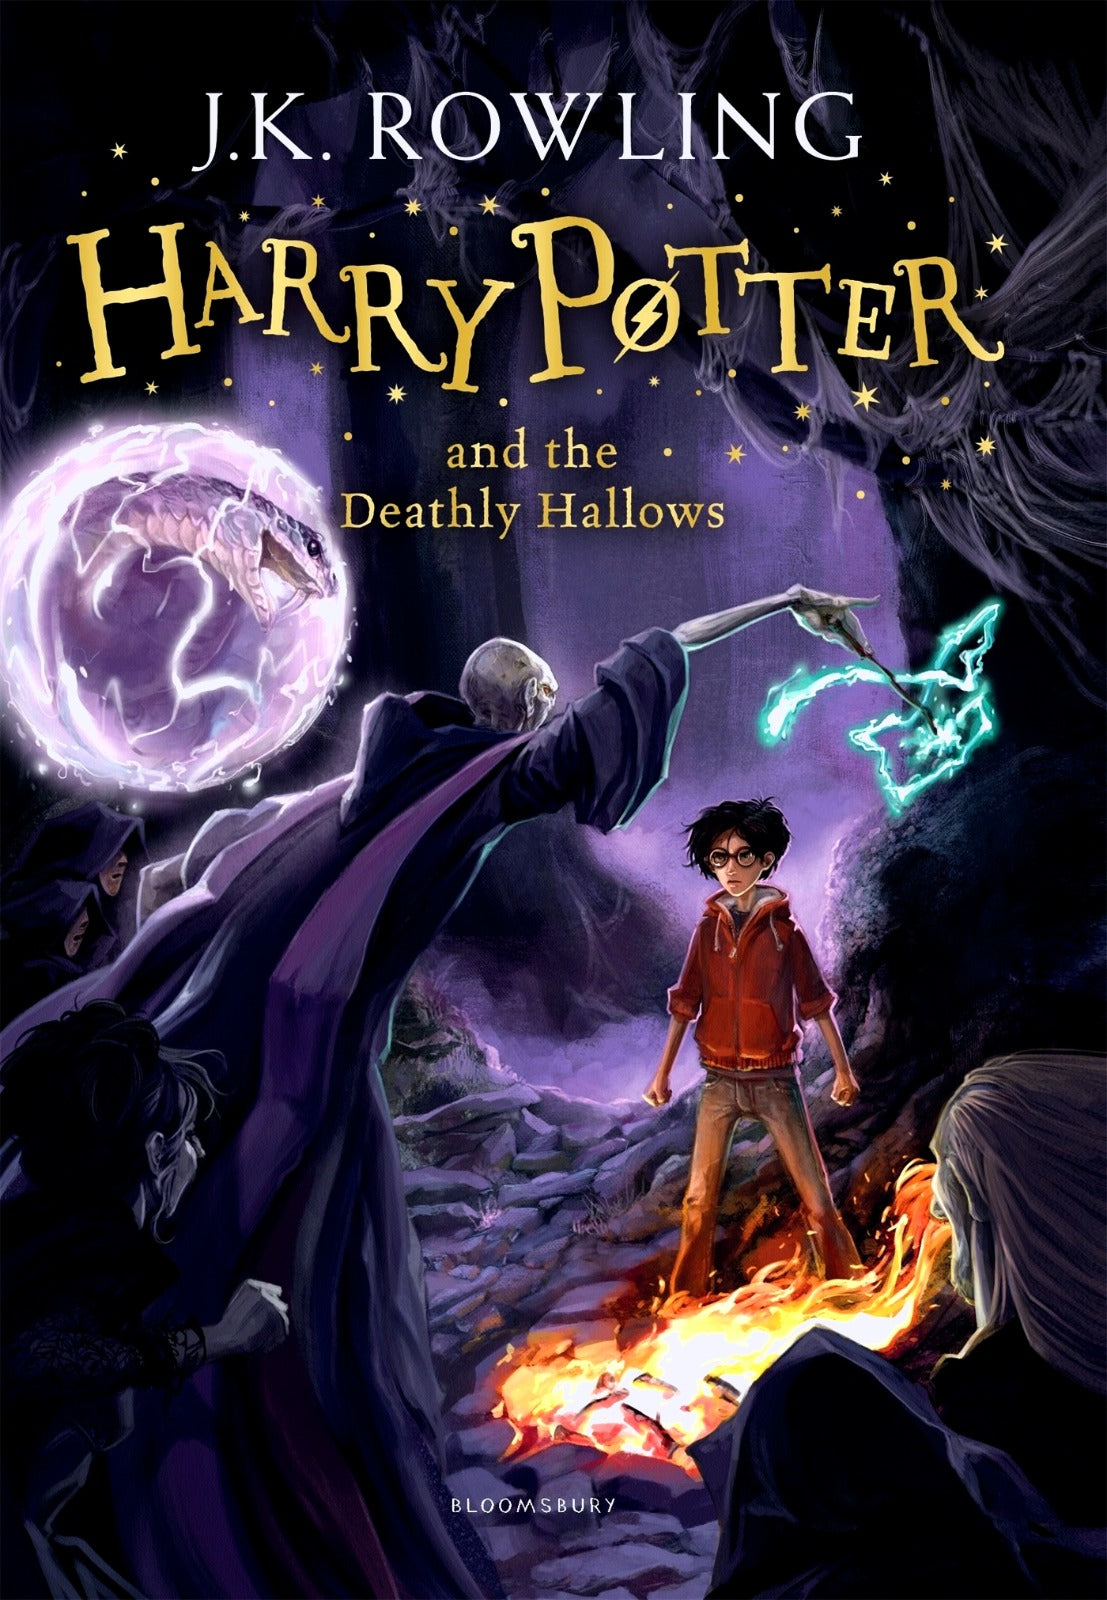 Harry Potter #7 Harry Potter and the Deathly Hallows